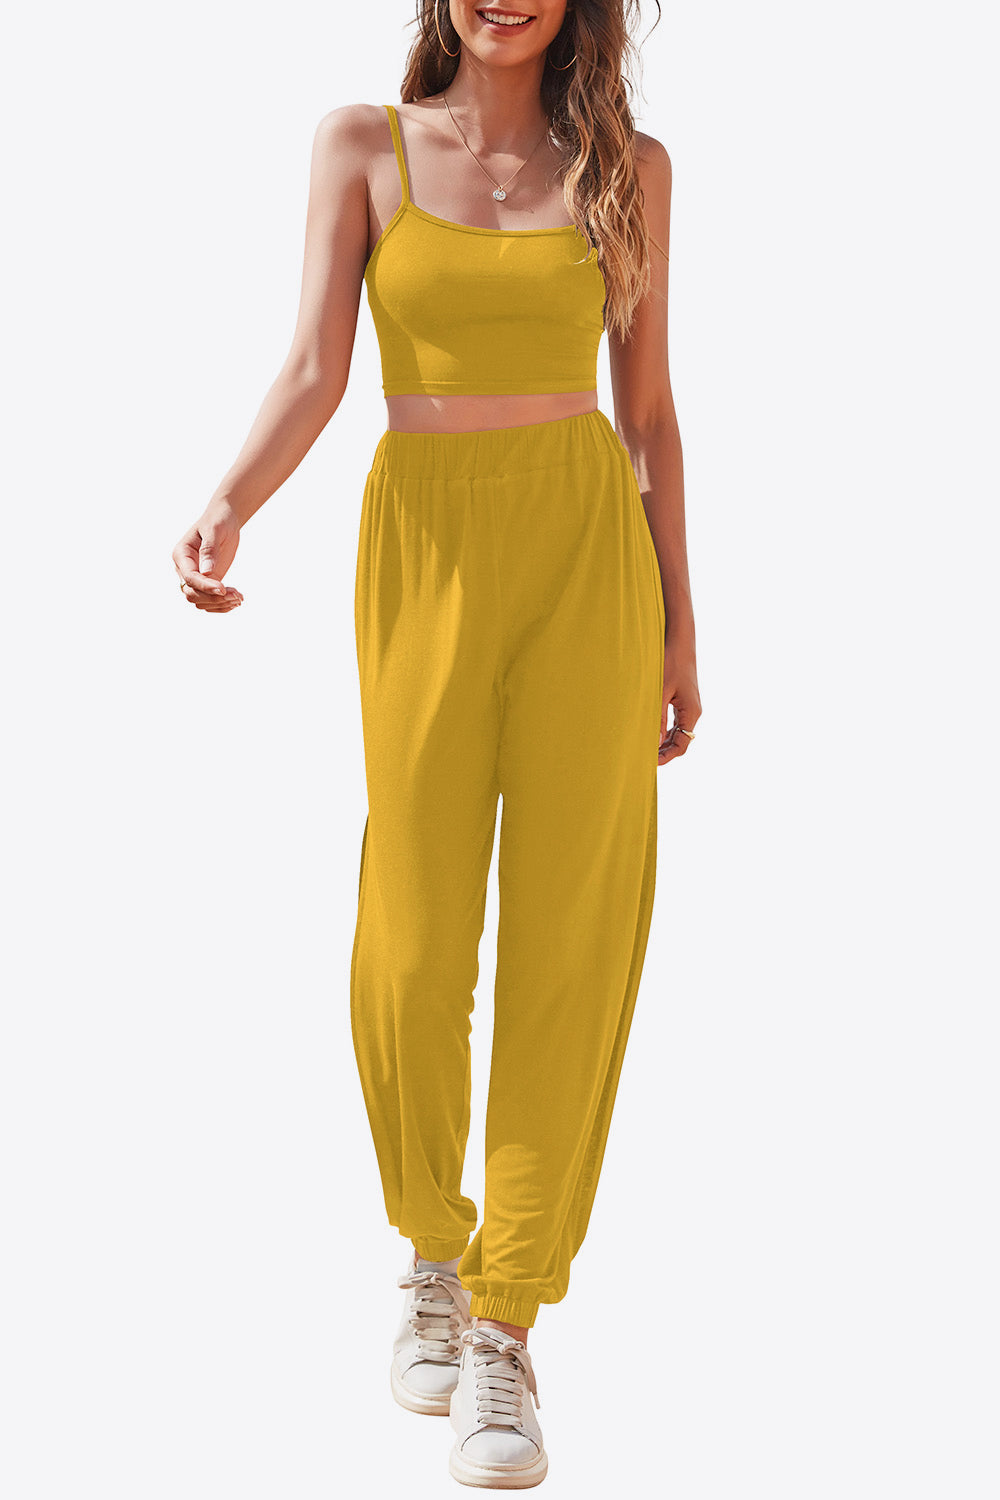 - Cropped Cami and Side Split Joggers Set - 4 colors - womens crop top & pants at TFC&H Co.